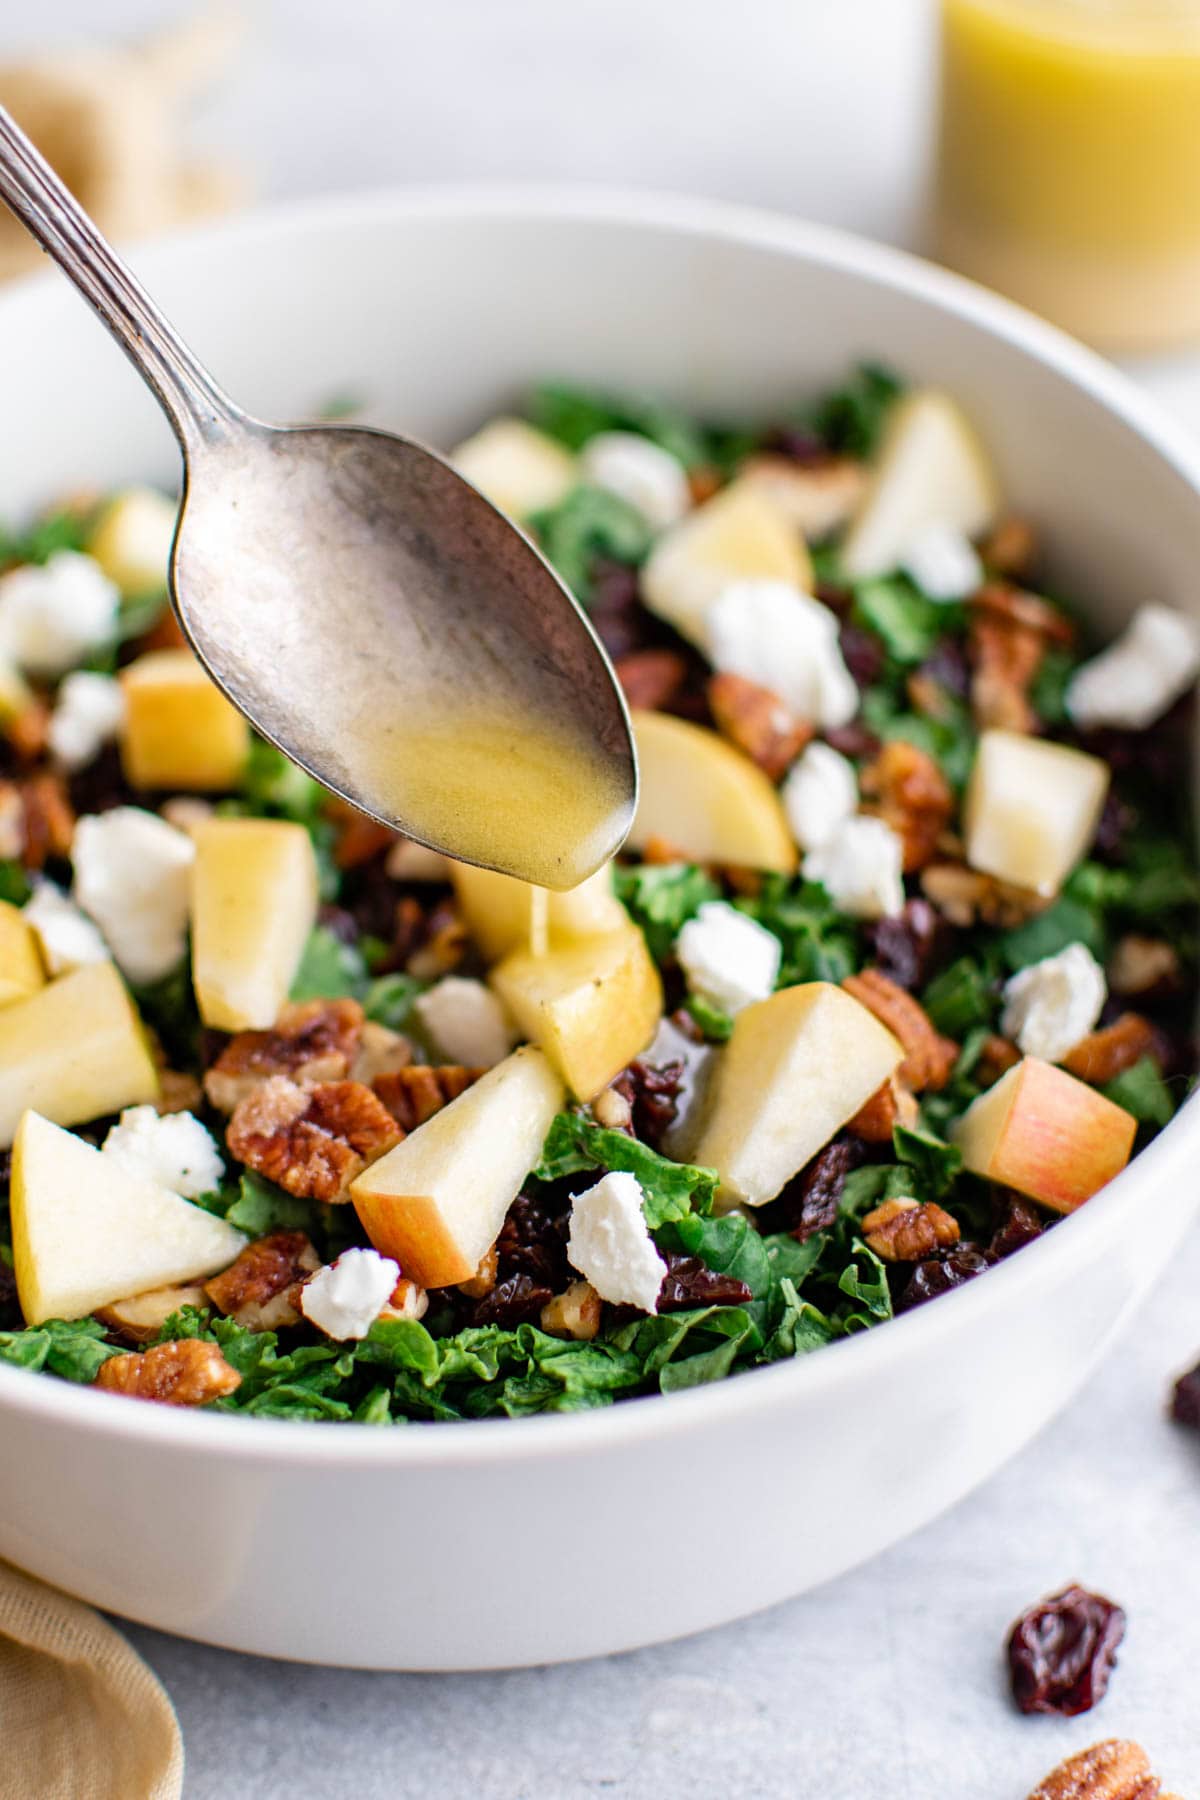 Bowl of kale salad with apples; Champagn vinaigrette drizzled over with a spoon.